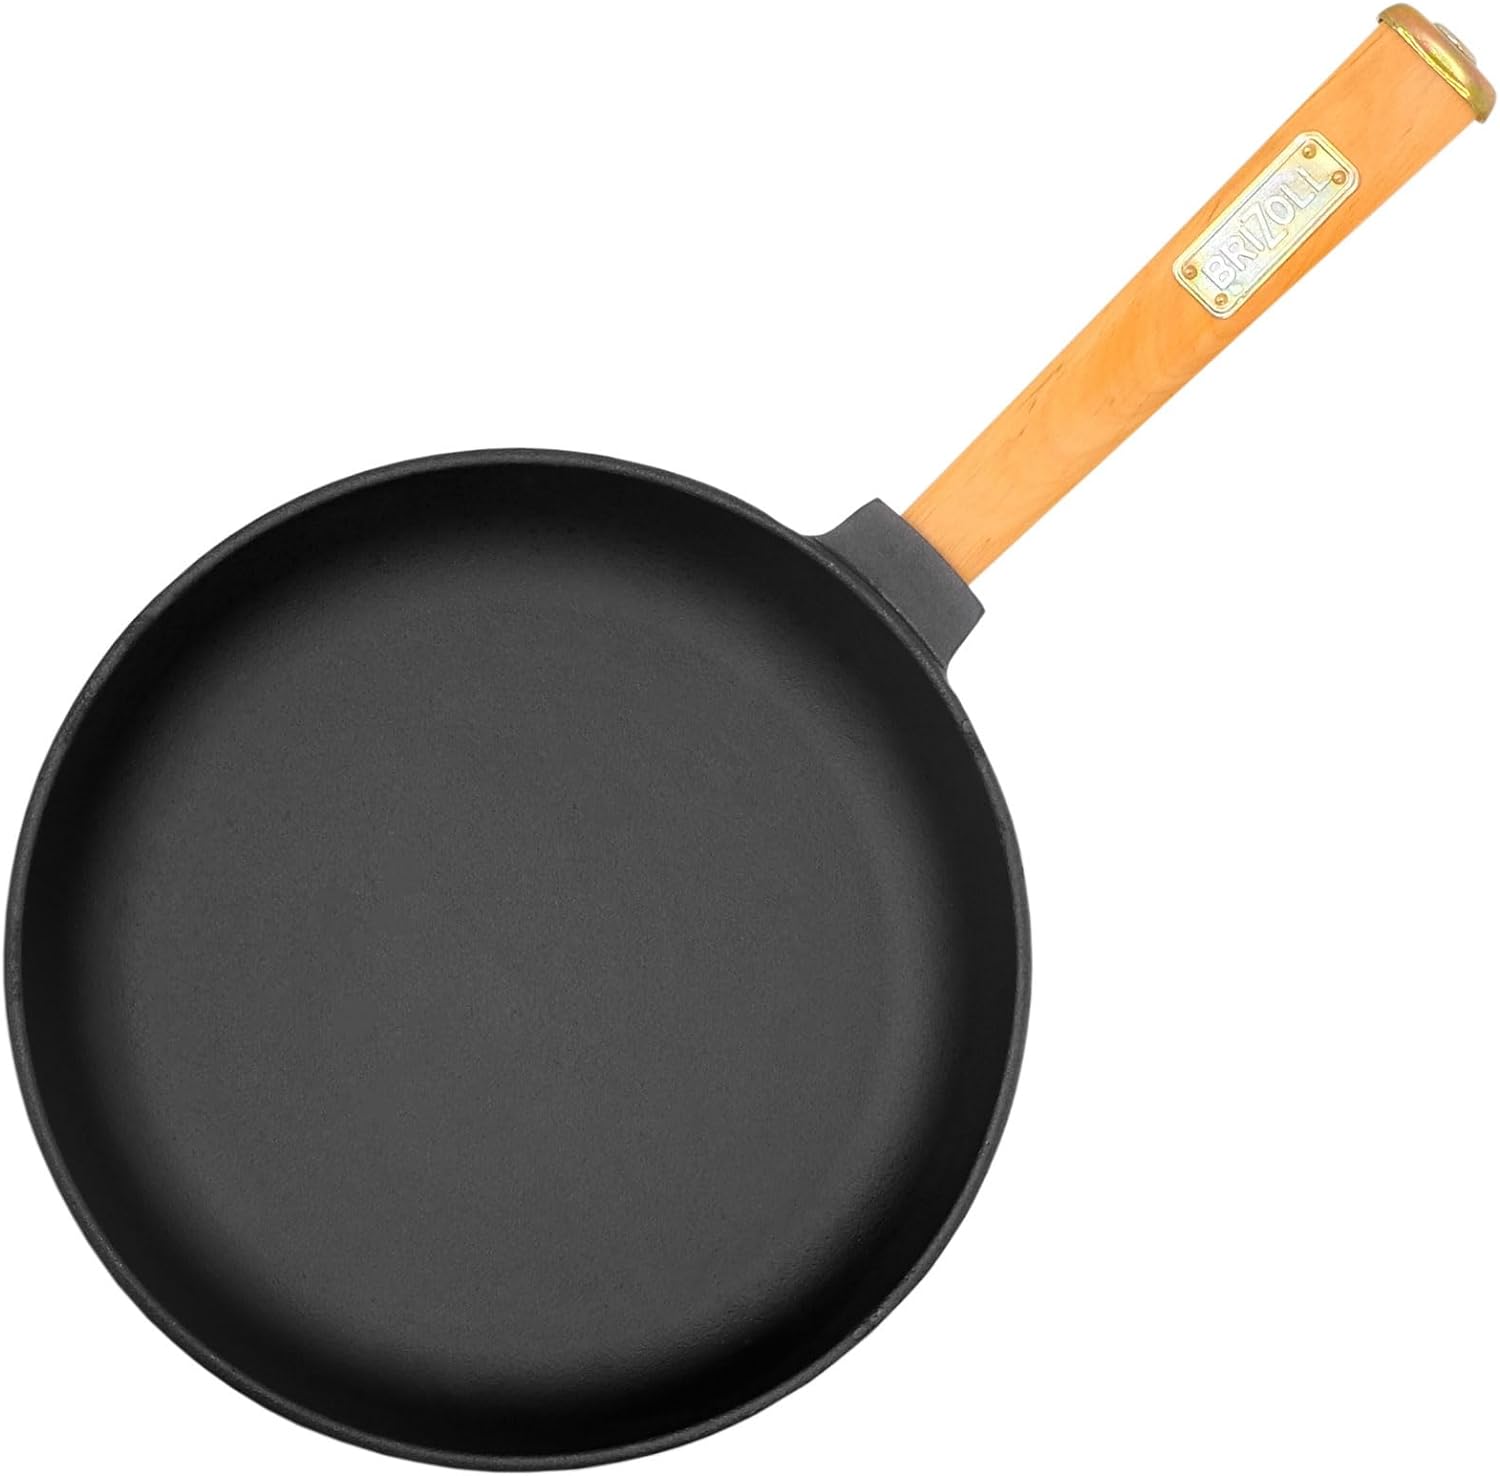 Cast iron pan 22 cm with wooden handle BRIZOLL -1076